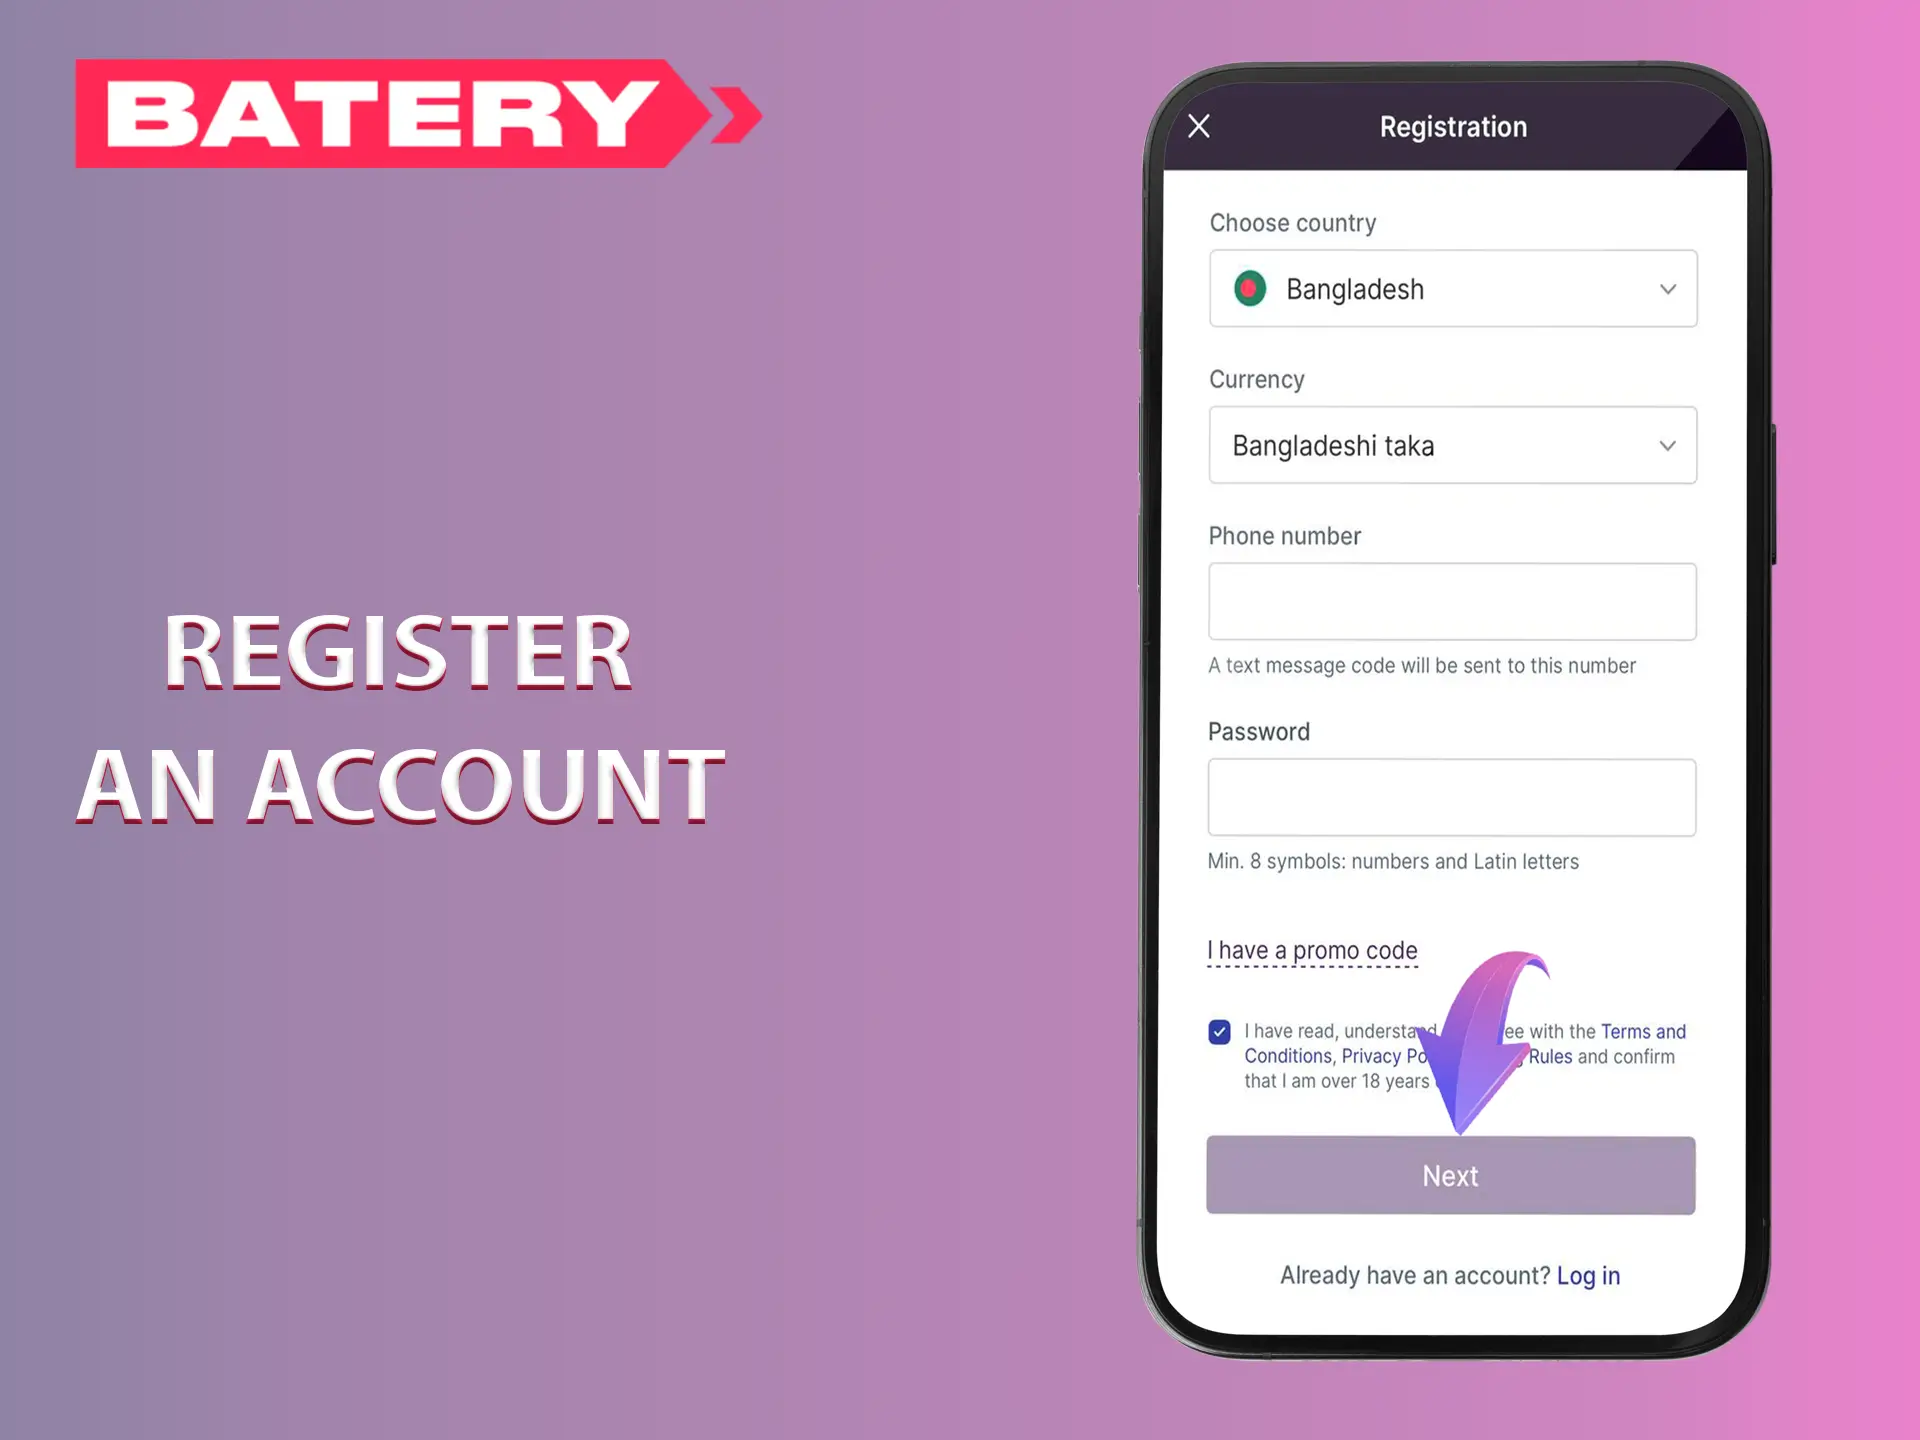 Complete the account registration in the app.